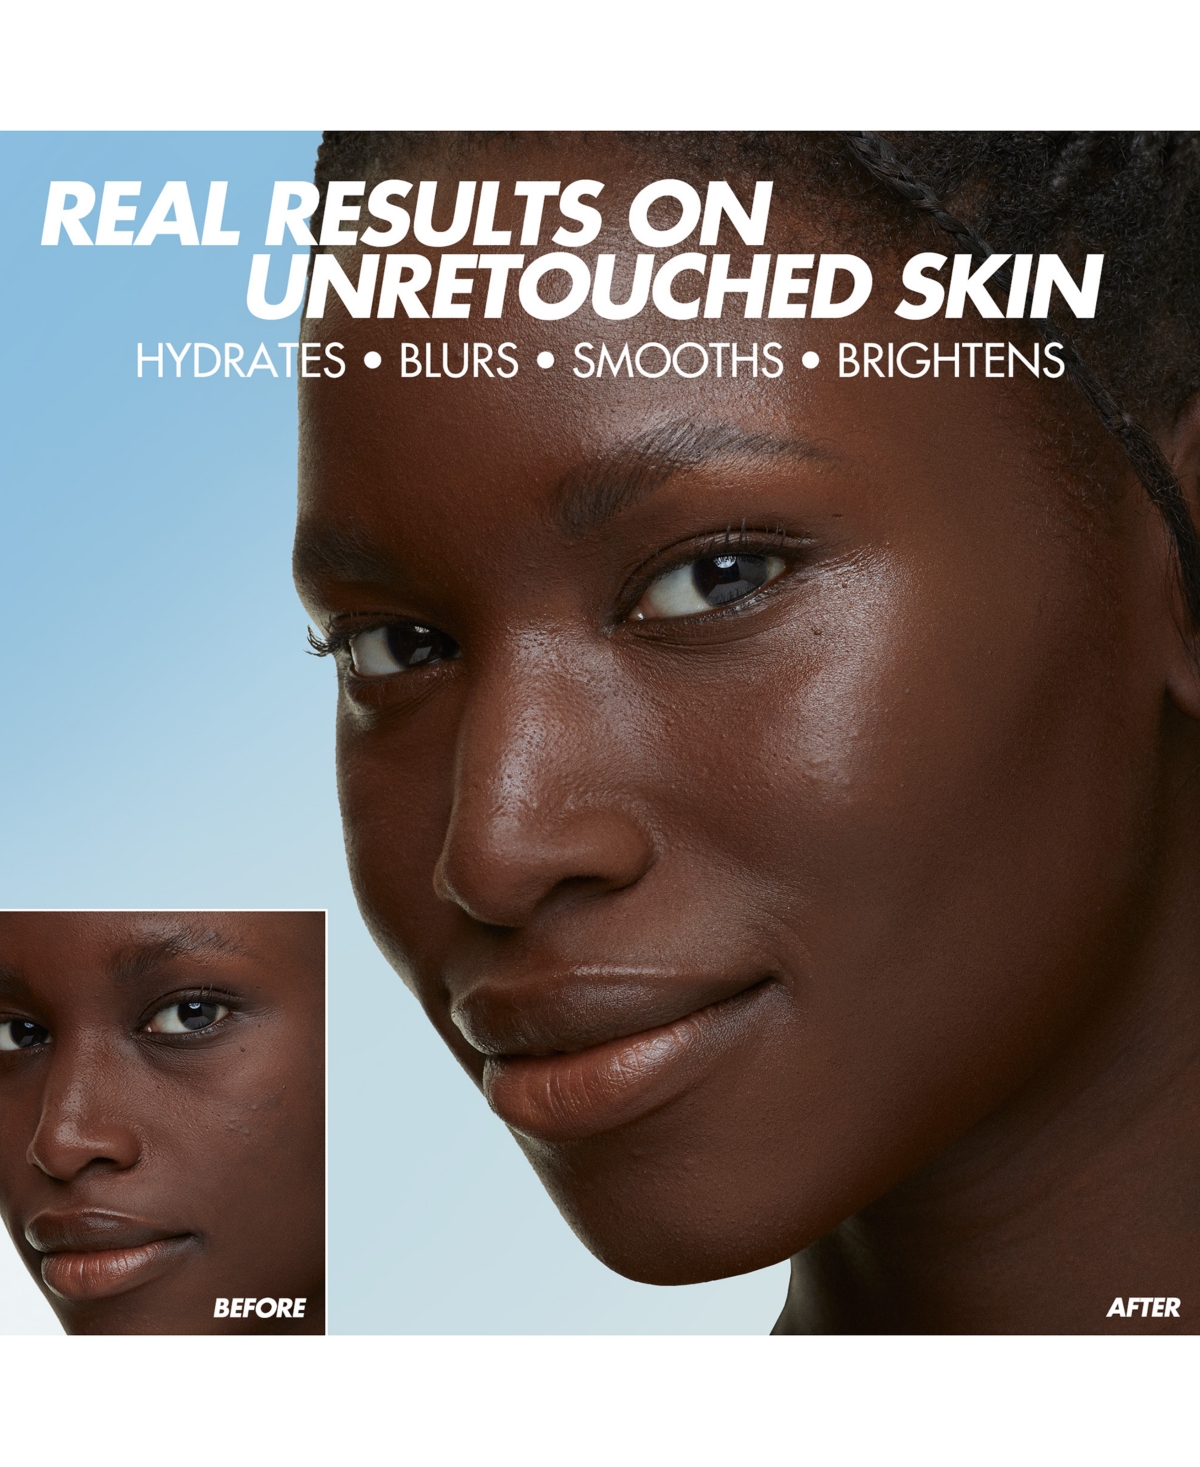 Shop Make Up For Ever Hd Skin Hydra Glow Skincare Foundation With Hyaluronic Acid In Y - Warm Porcelainâ - For Fair To Light